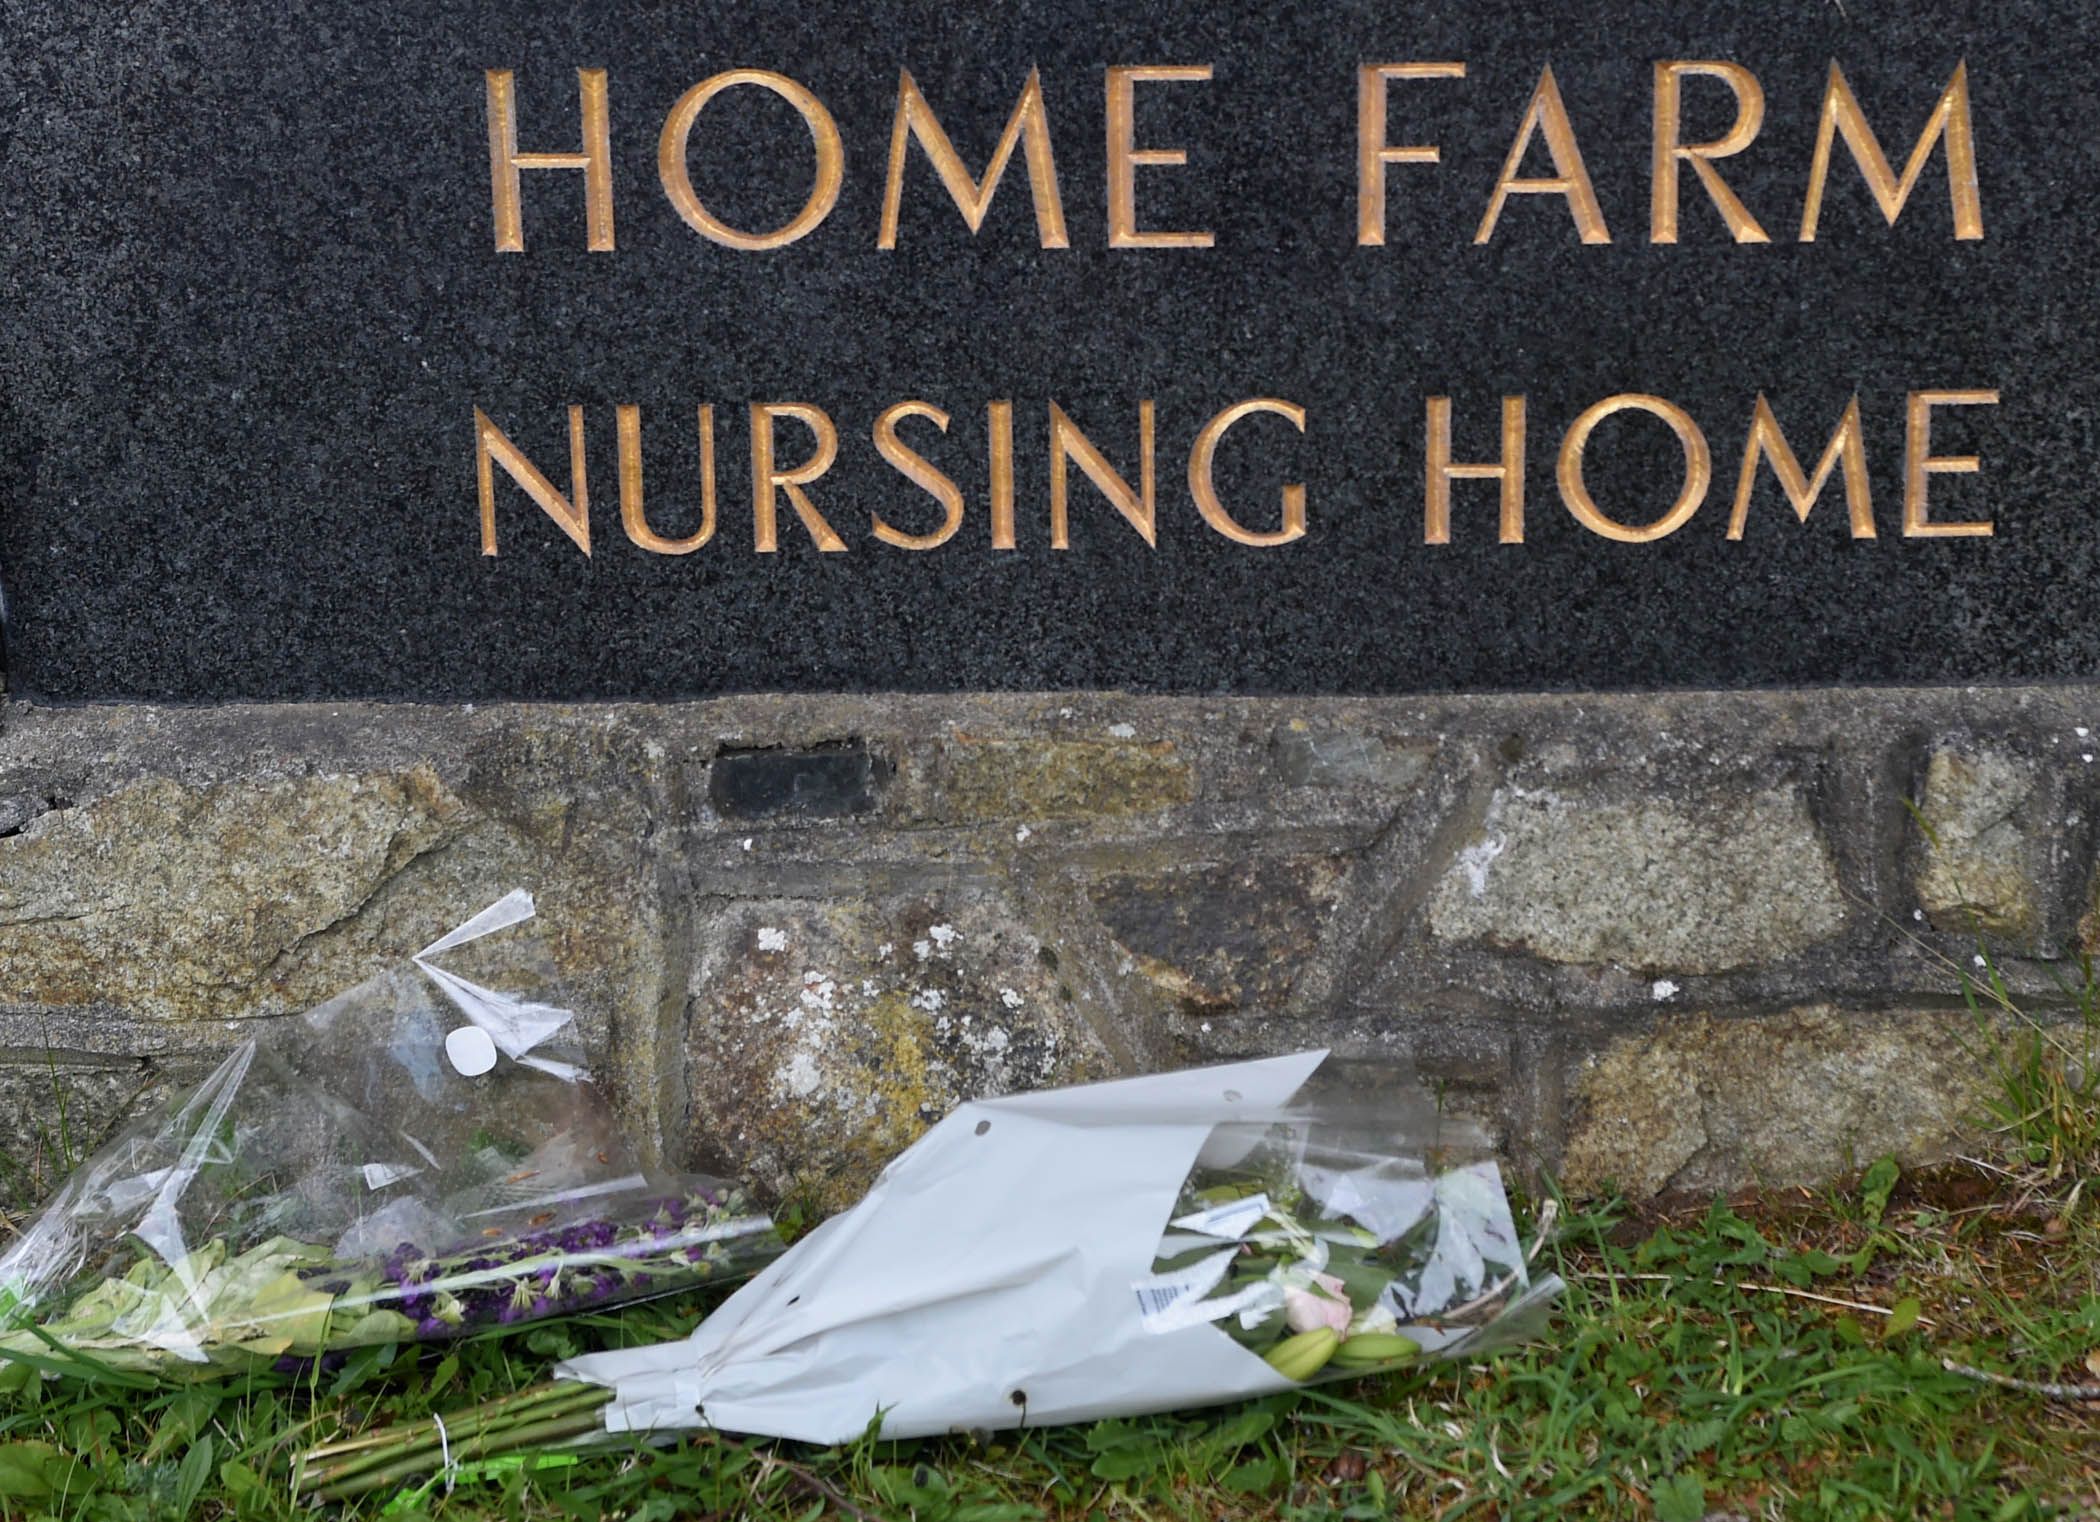 Flowers laid out the front of the Home Farm Nursing Home.
Picture by Iain Smith.